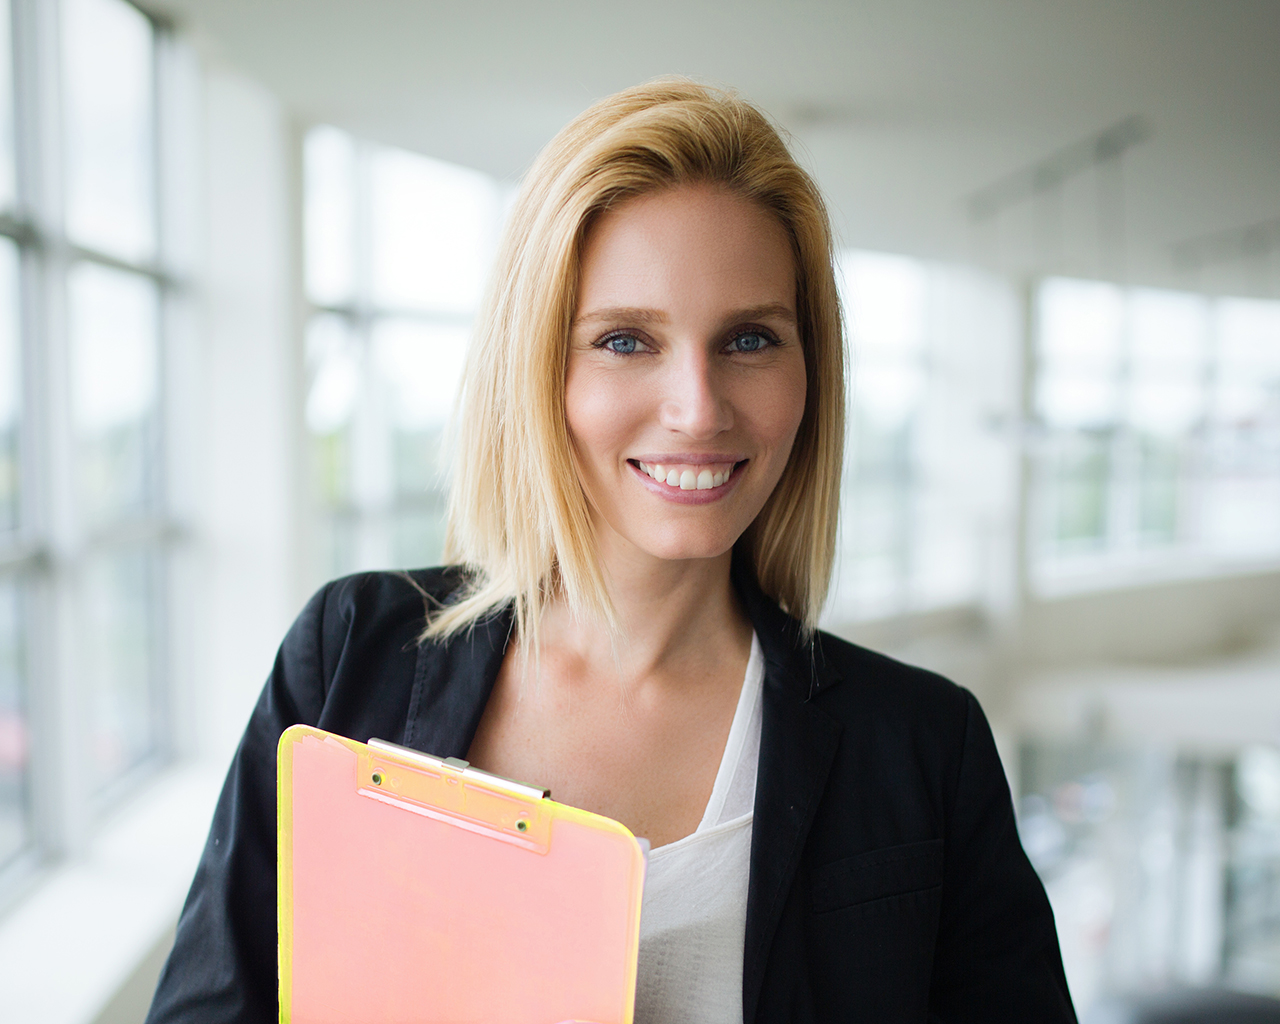 Successful smiling business woman at work holding documents, standing near window in office